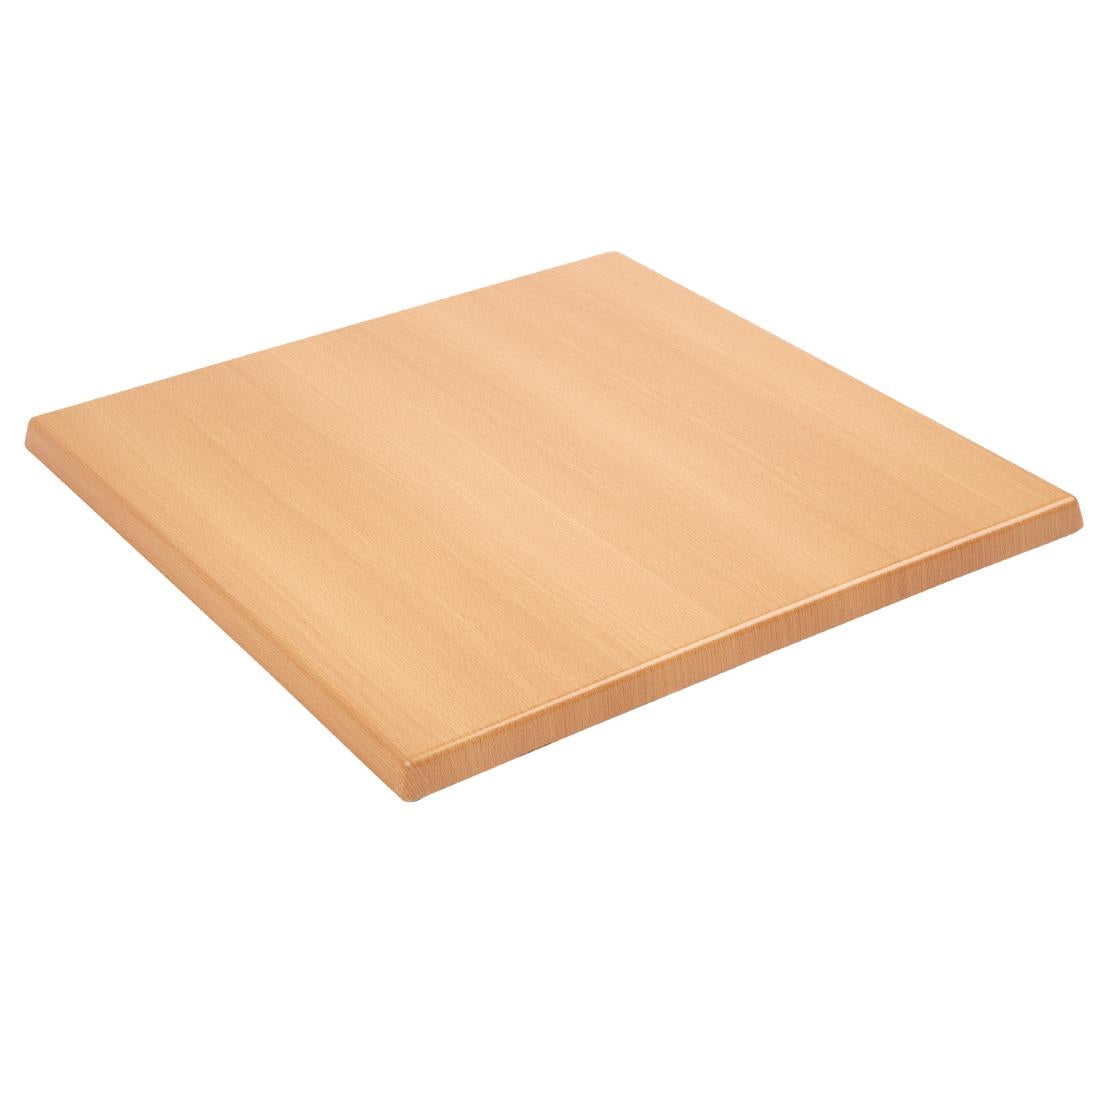 GG638 Bolero Pre-drilled Square Table Top Beech Effect 700mm JD Catering Equipment Solutions Ltd